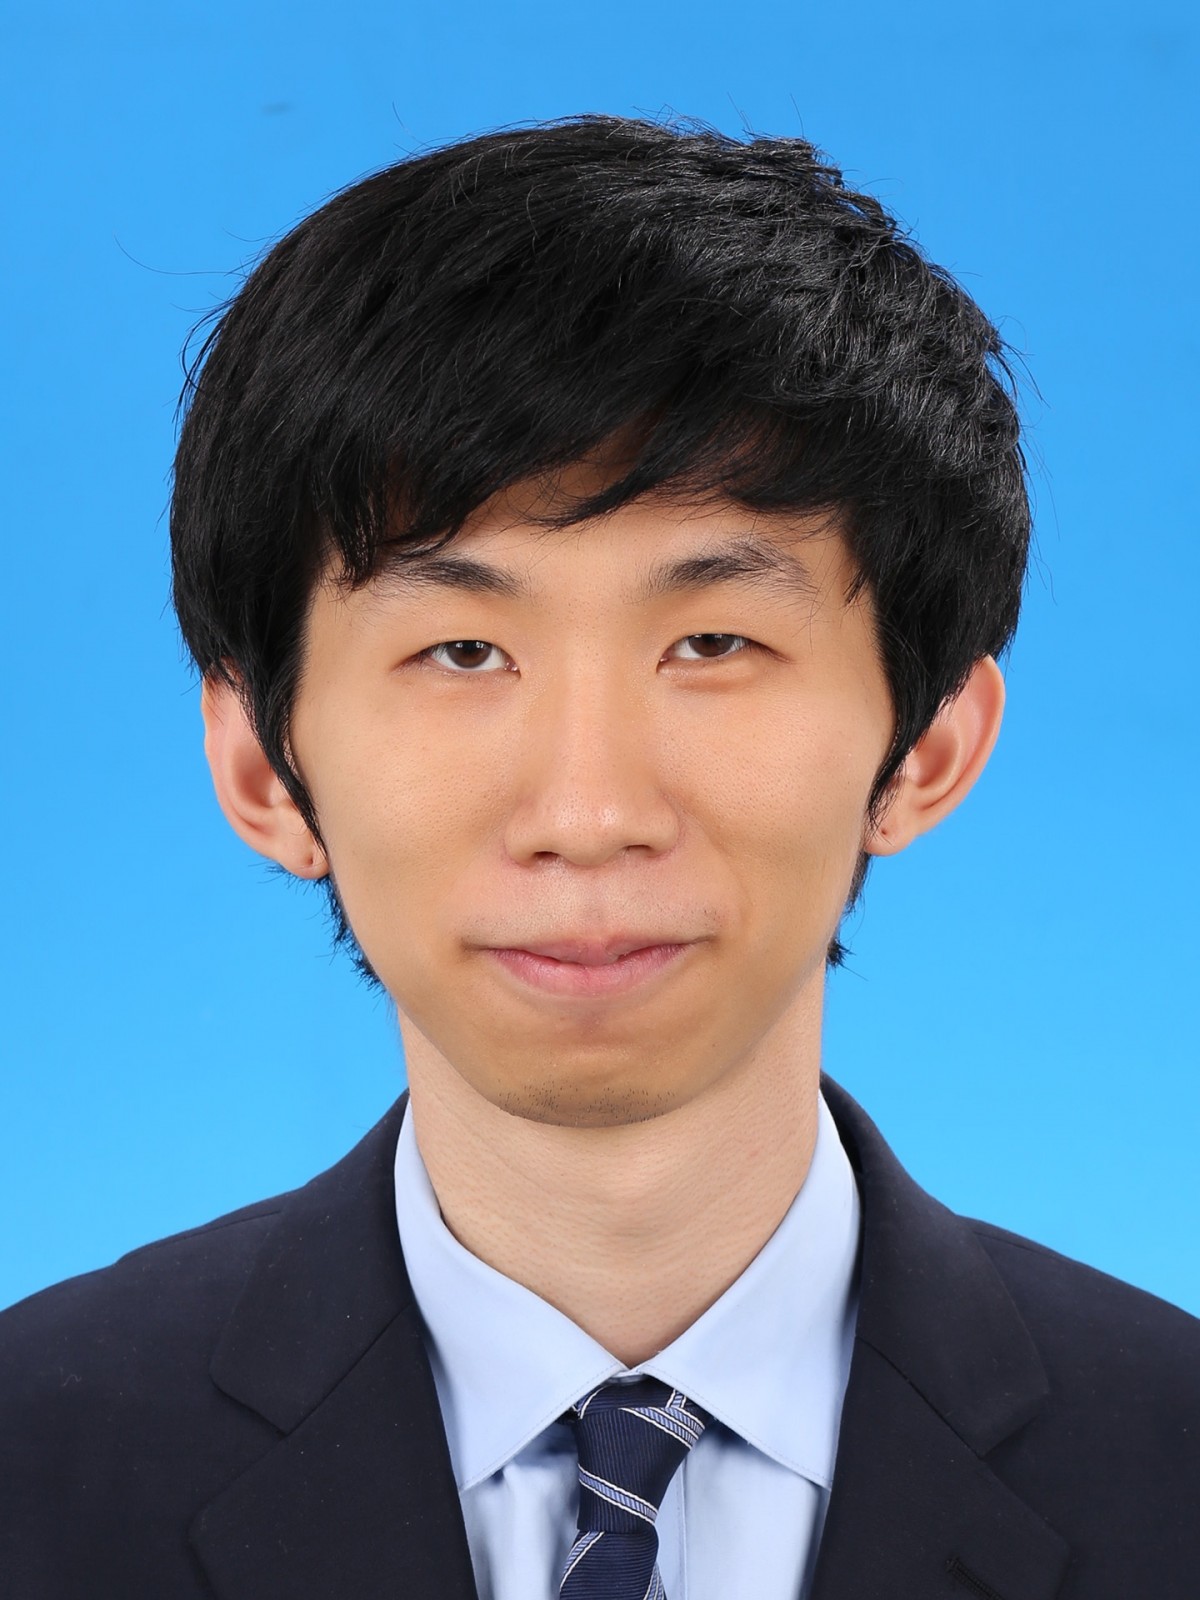 chinese_one_male_business_people-1086504.jpg!d